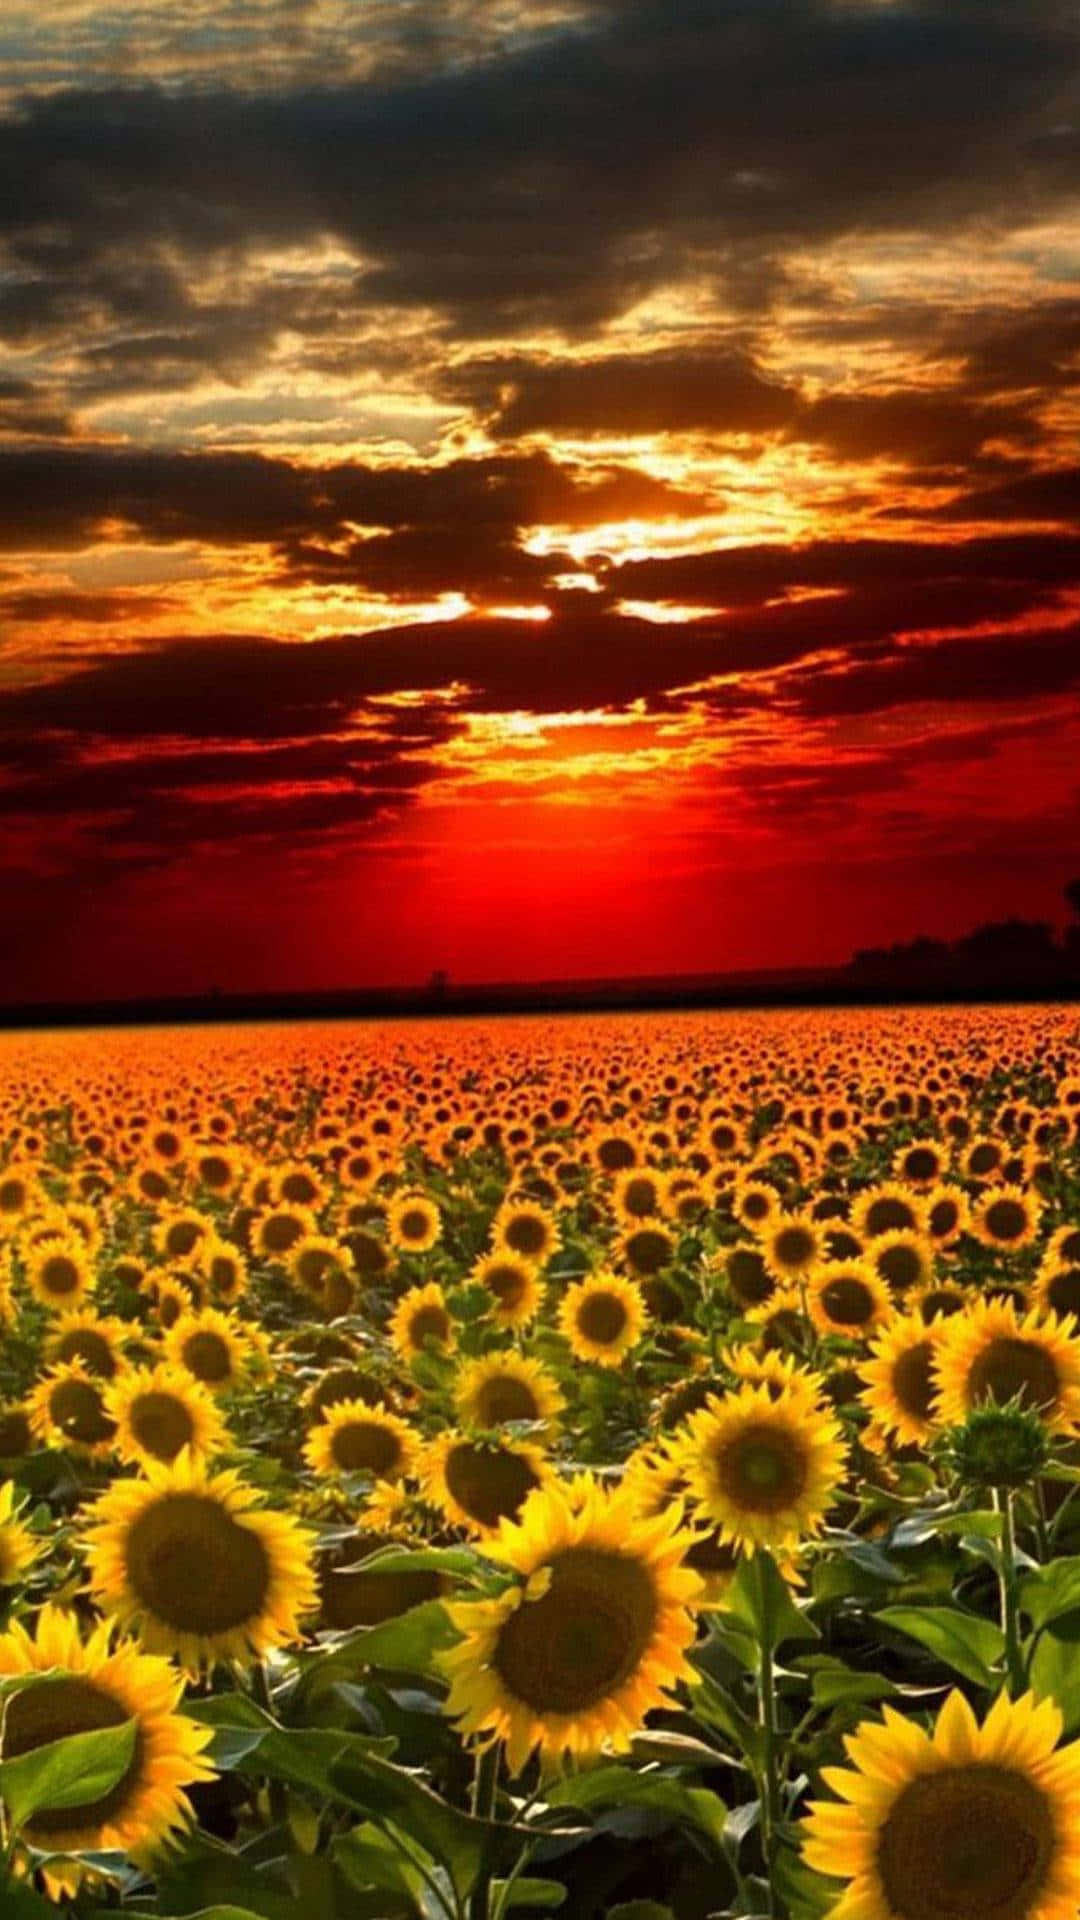 "Enjoy the Beauty of Sunflowers with this Aesthetic iPhone Wallpaper!" Wallpaper